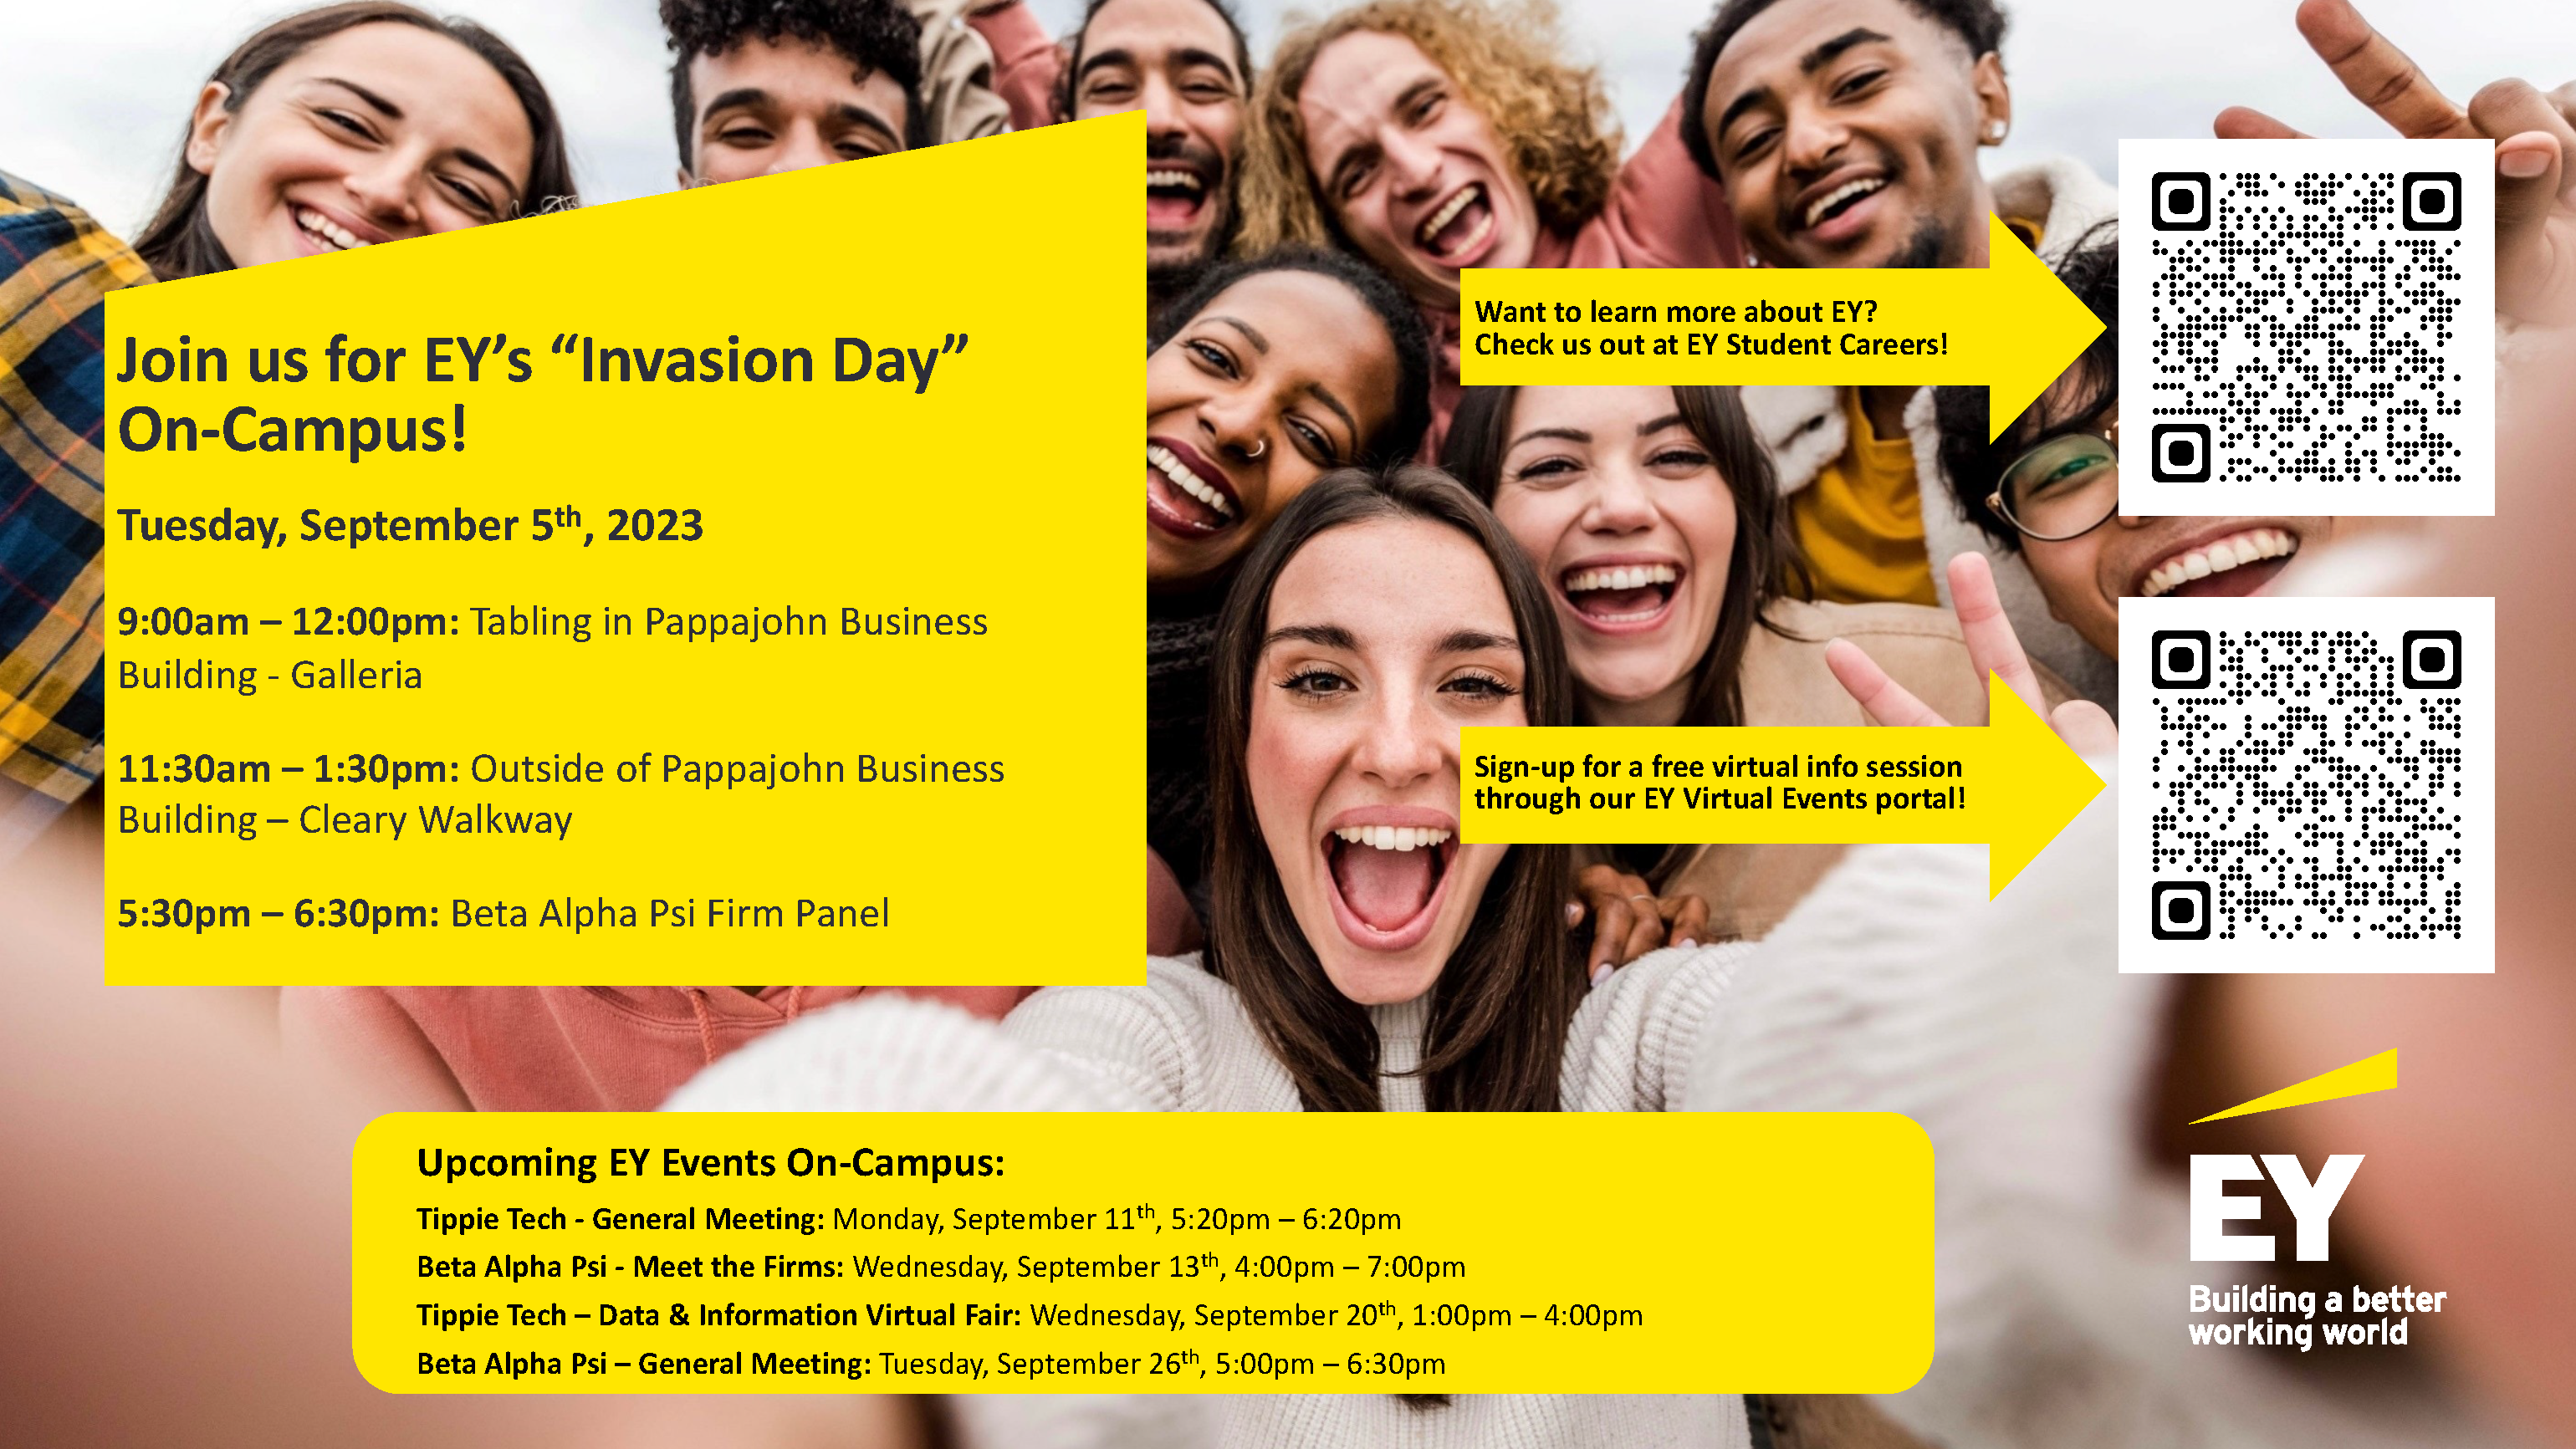 EY "Invasion Day" Tuesday, September 5th